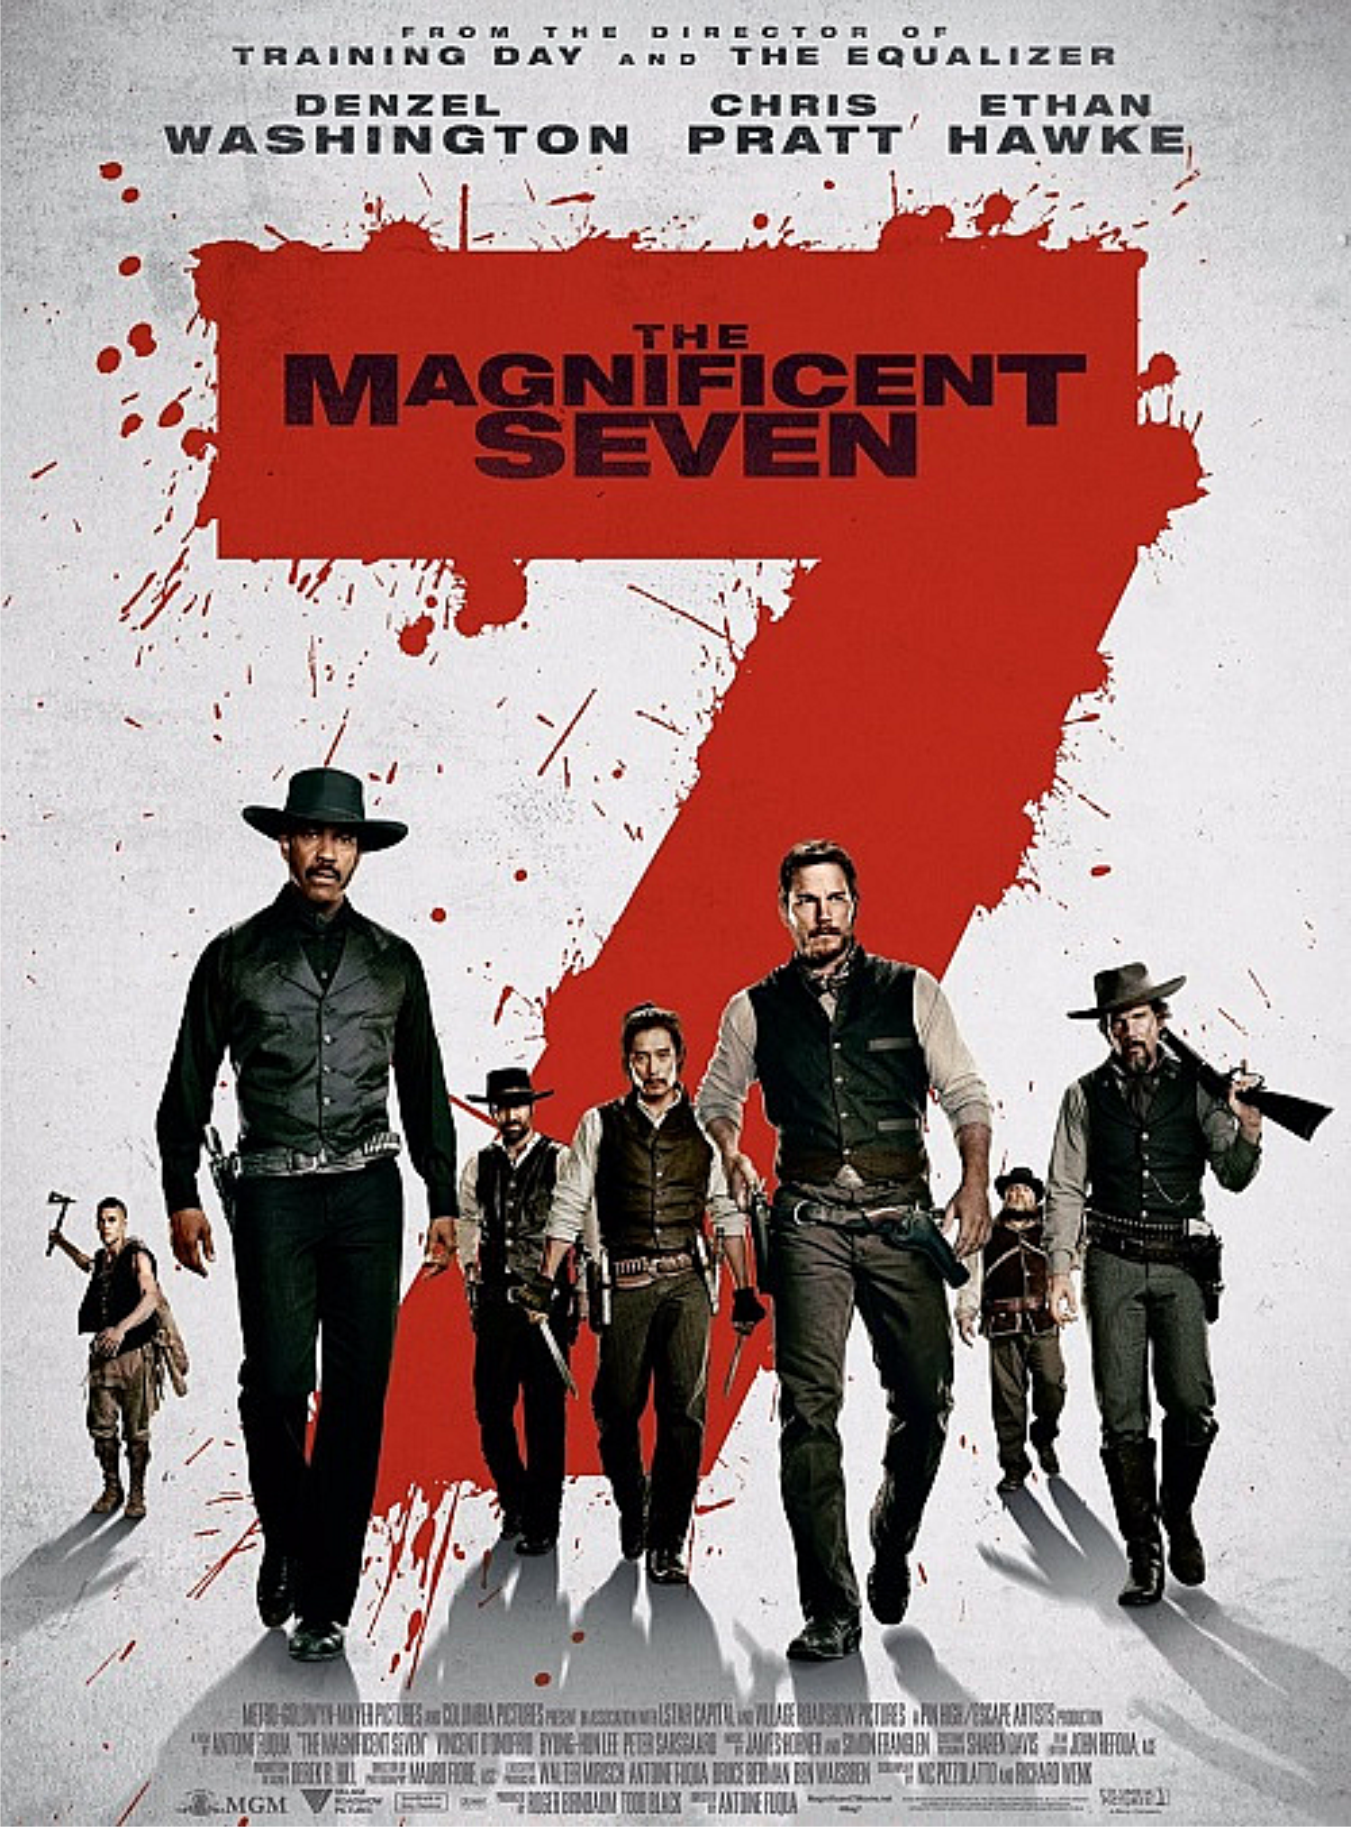 THE MAGNIFICENT 7 2016 - poster 3